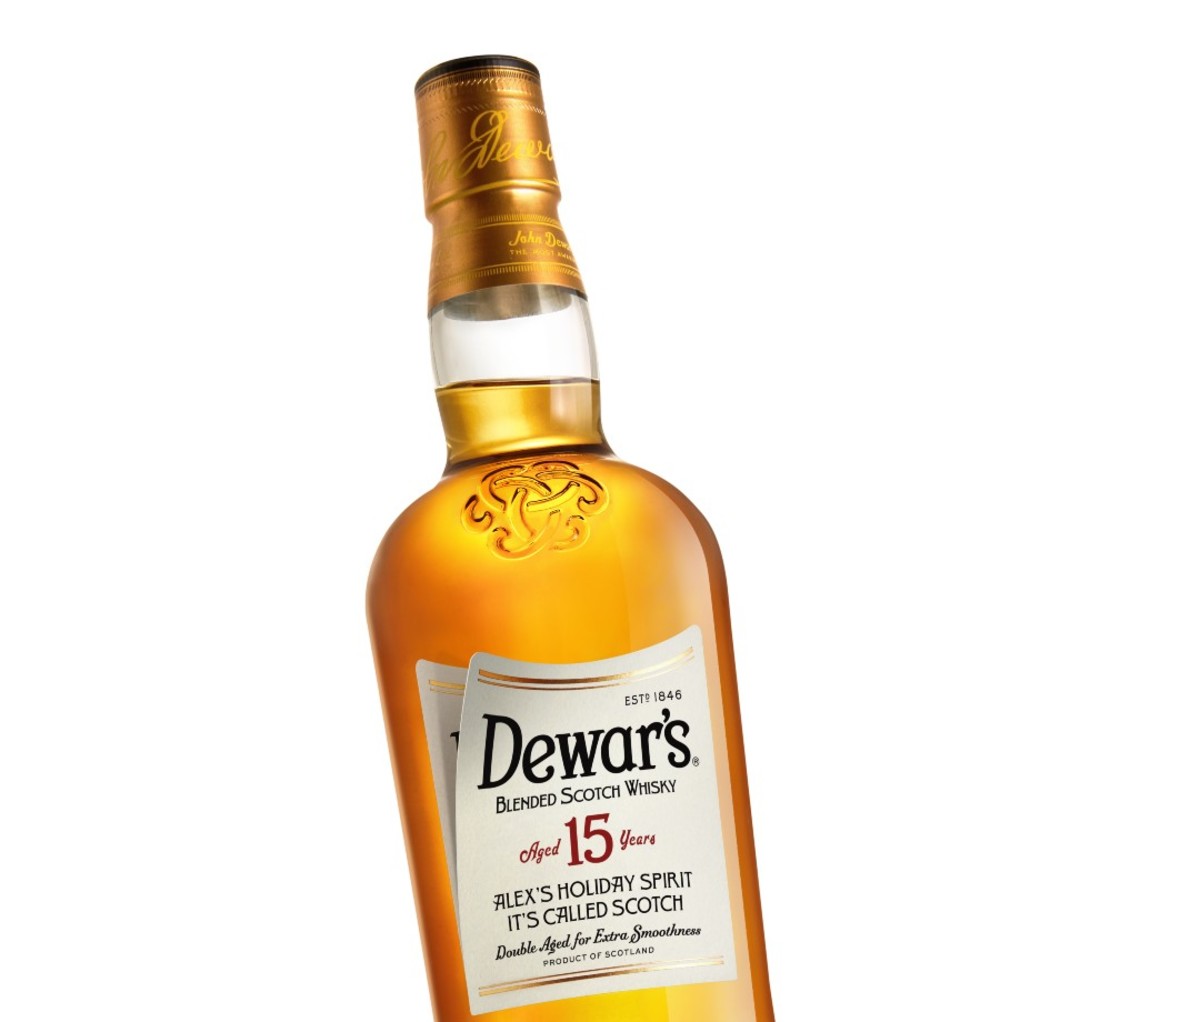 Dewar’s Blended Scotch Whisky, 12 Years and 15 Years